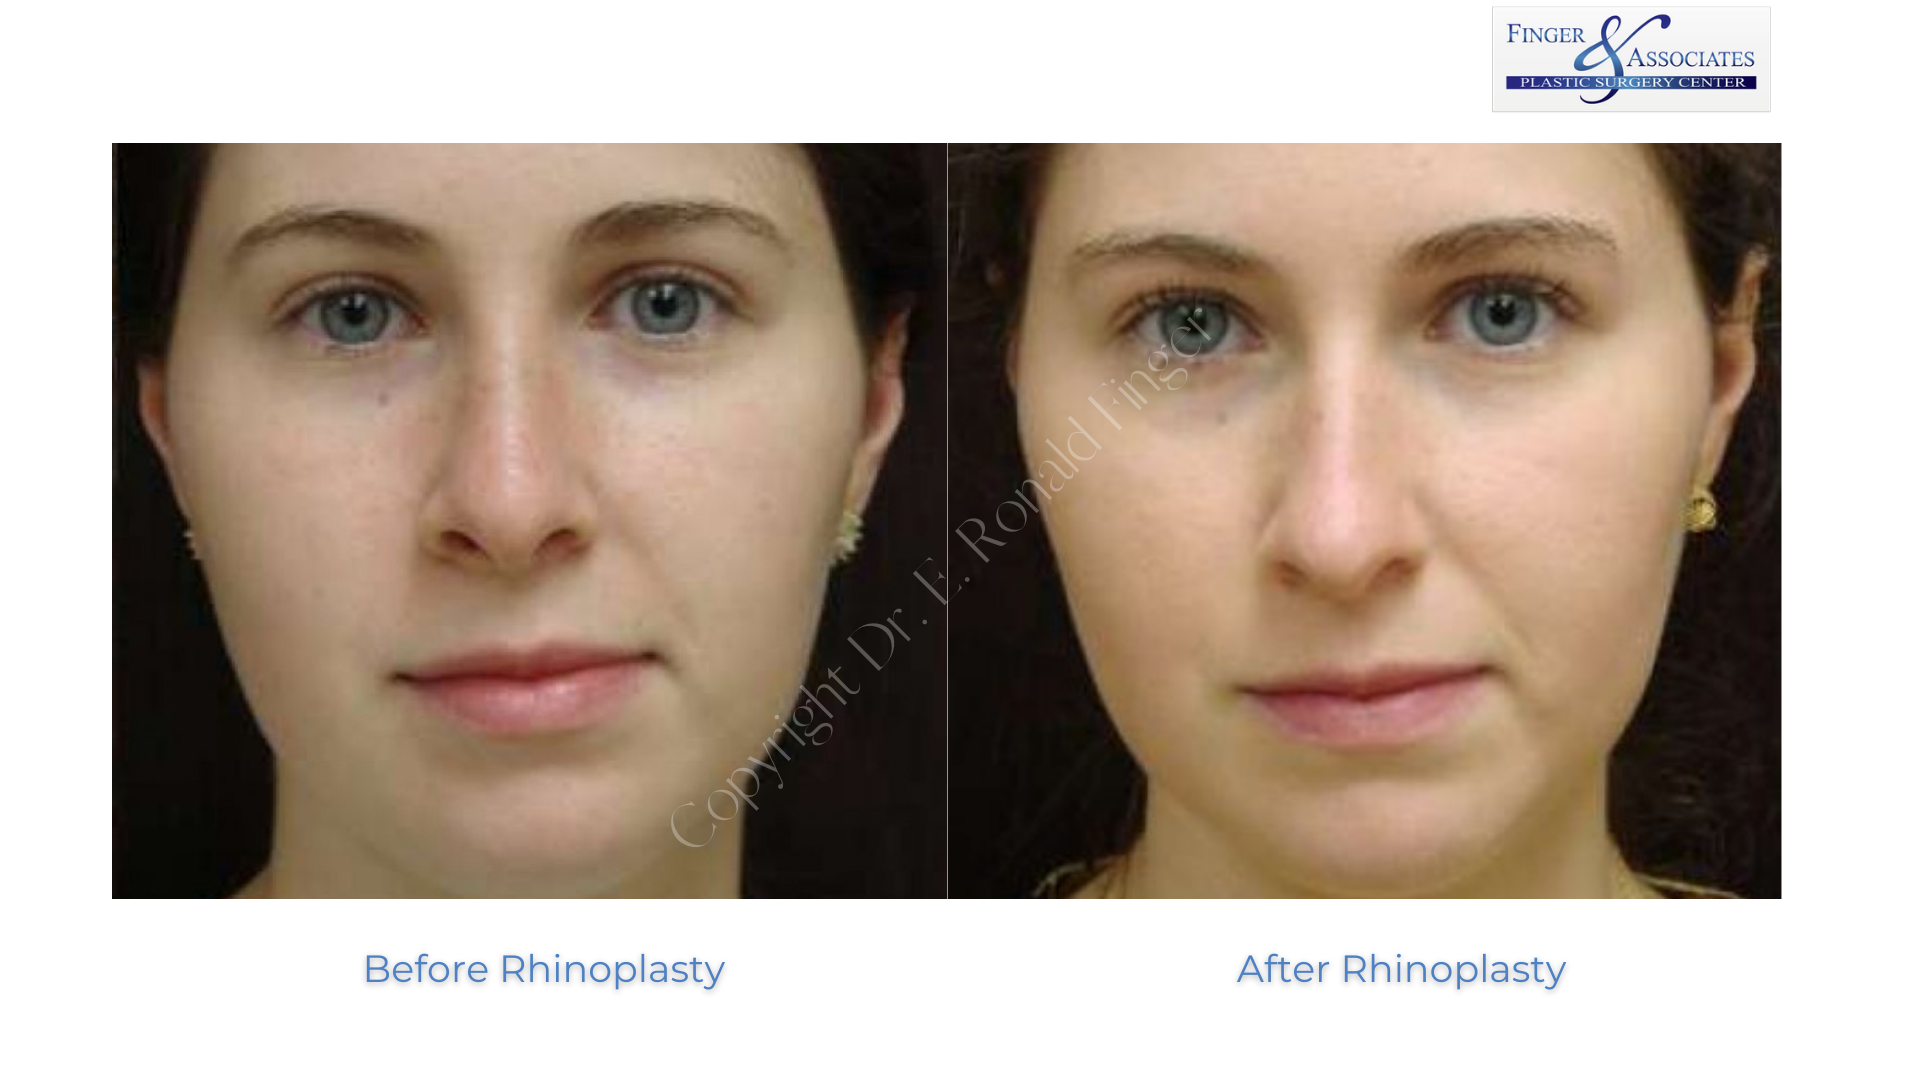 Before and after Rhinoplasty by Dr. Finger